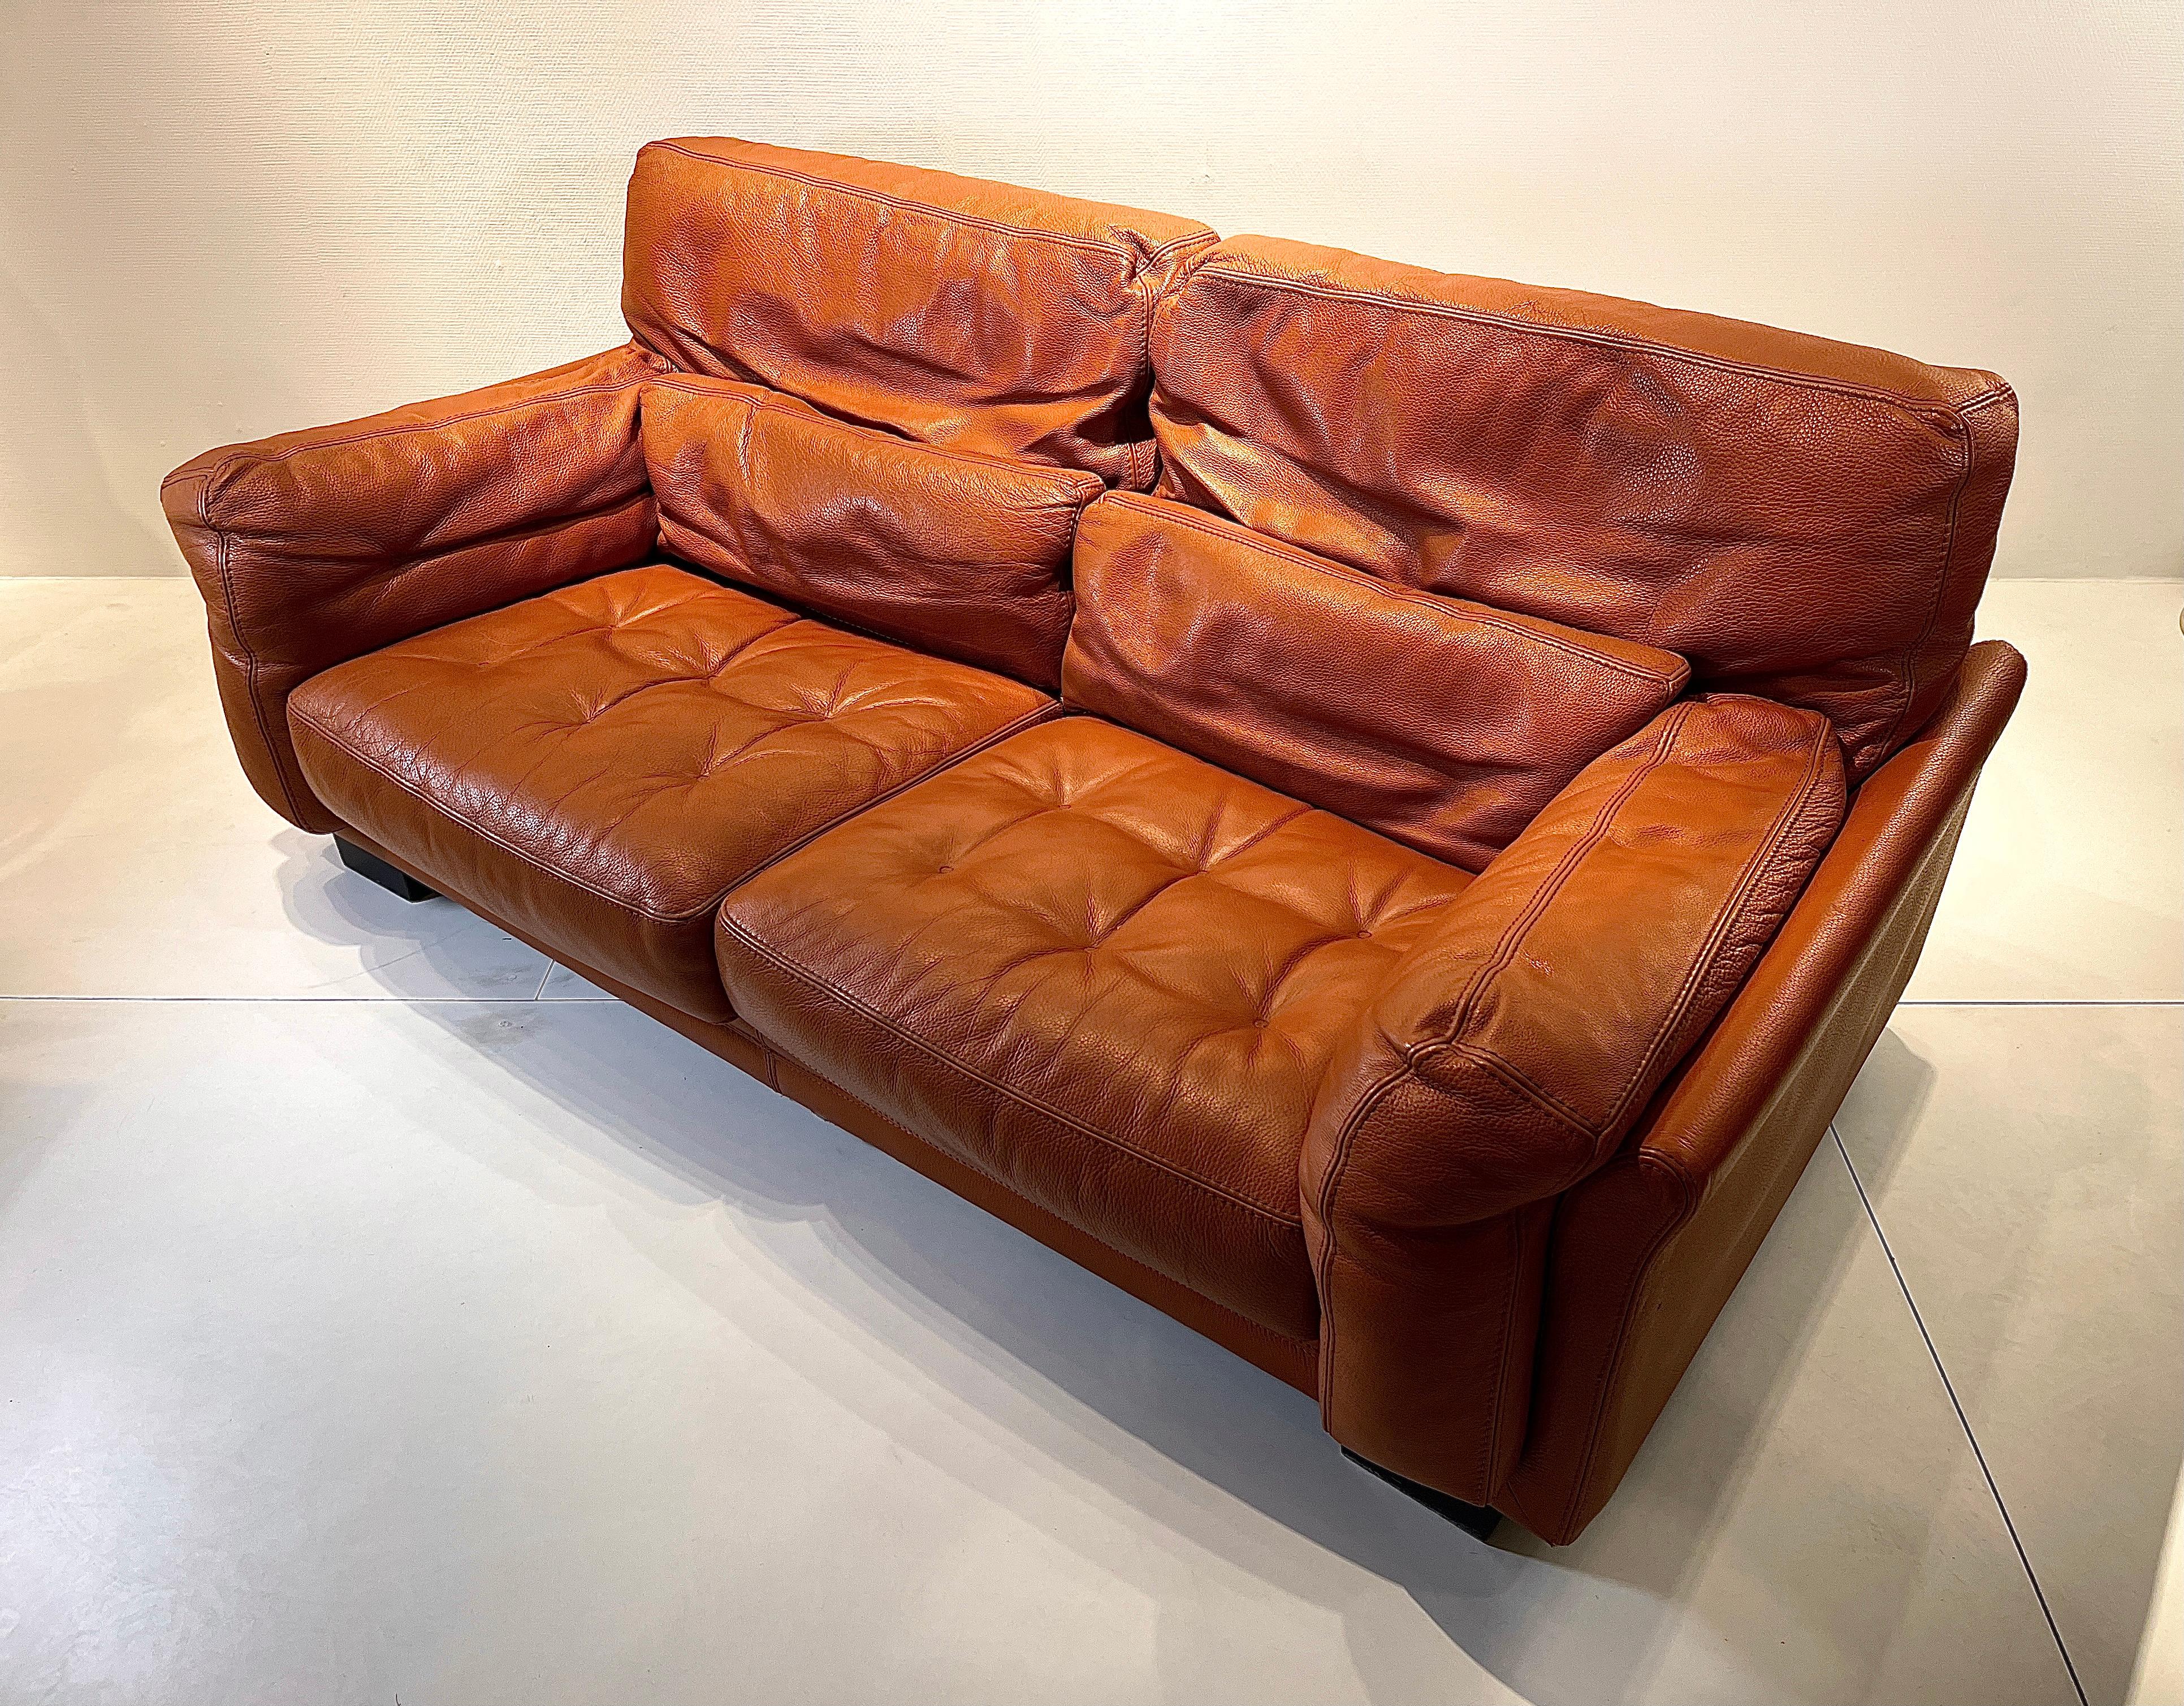 Sofa in cognac leather in very good condition from the 1980s, feet base in wood. Goose feather pillow. In very good condition.